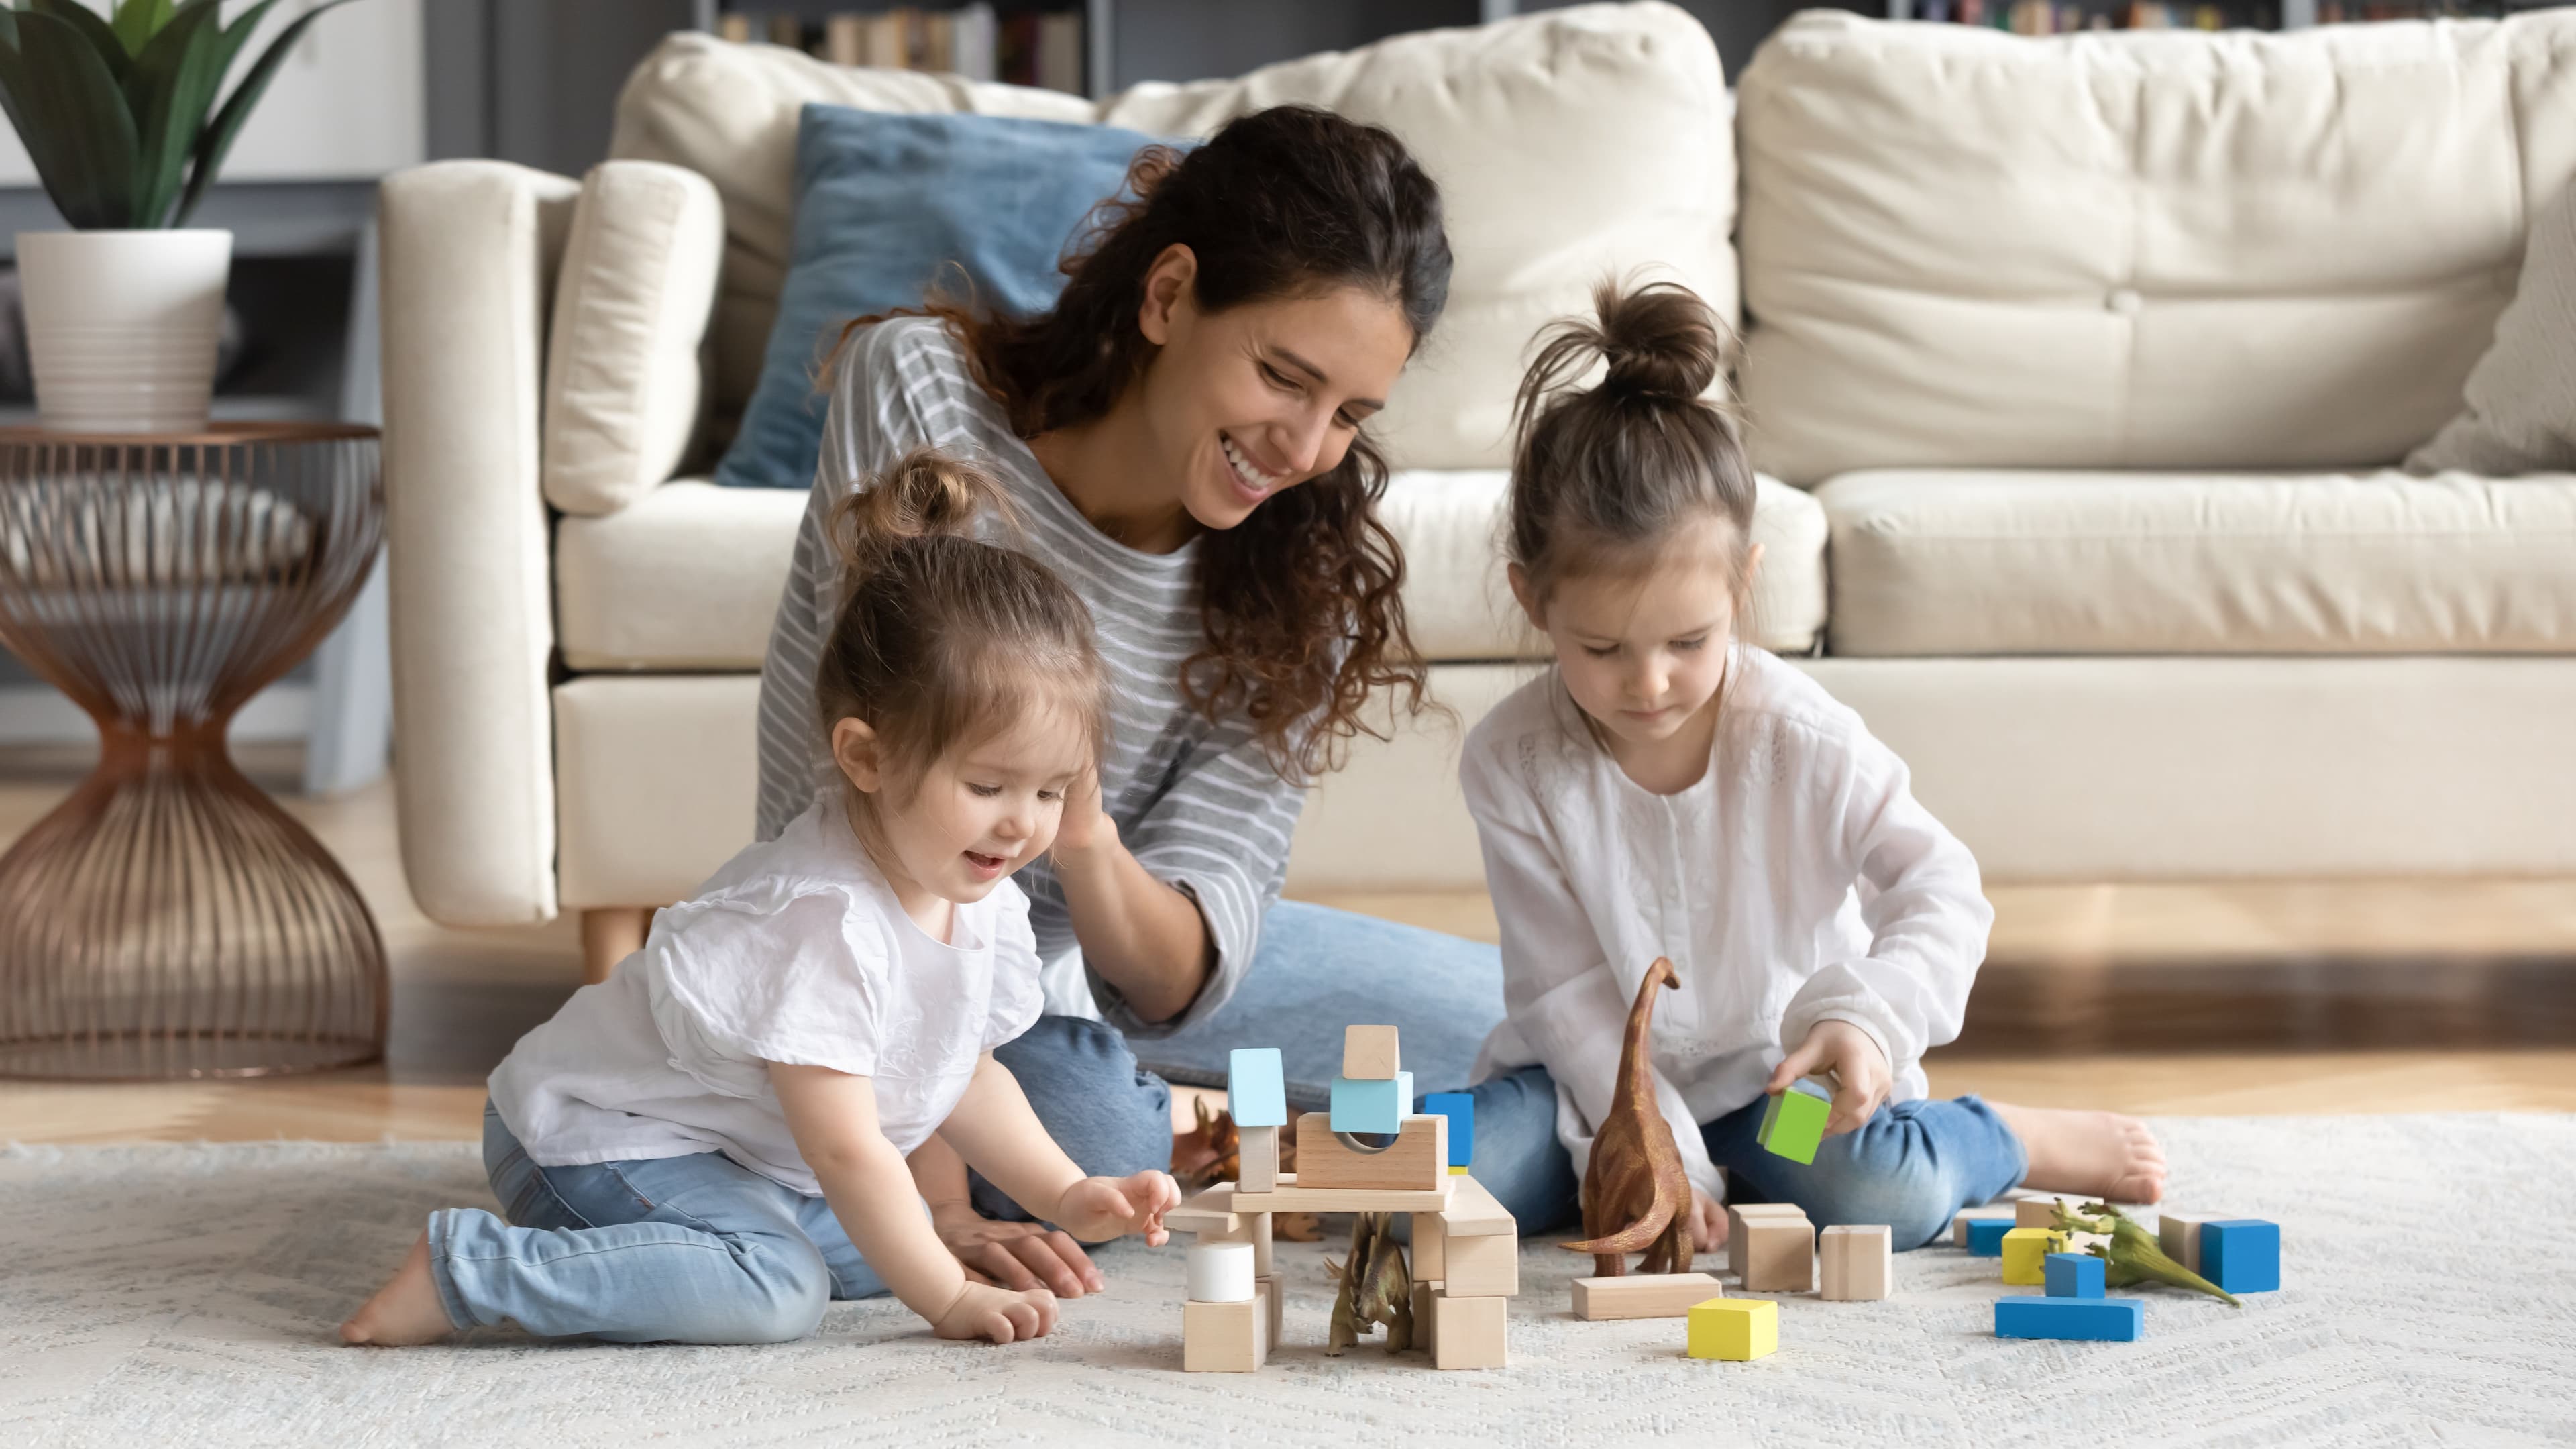 An image of a mother playing with her two daughters on the floor of their living room 